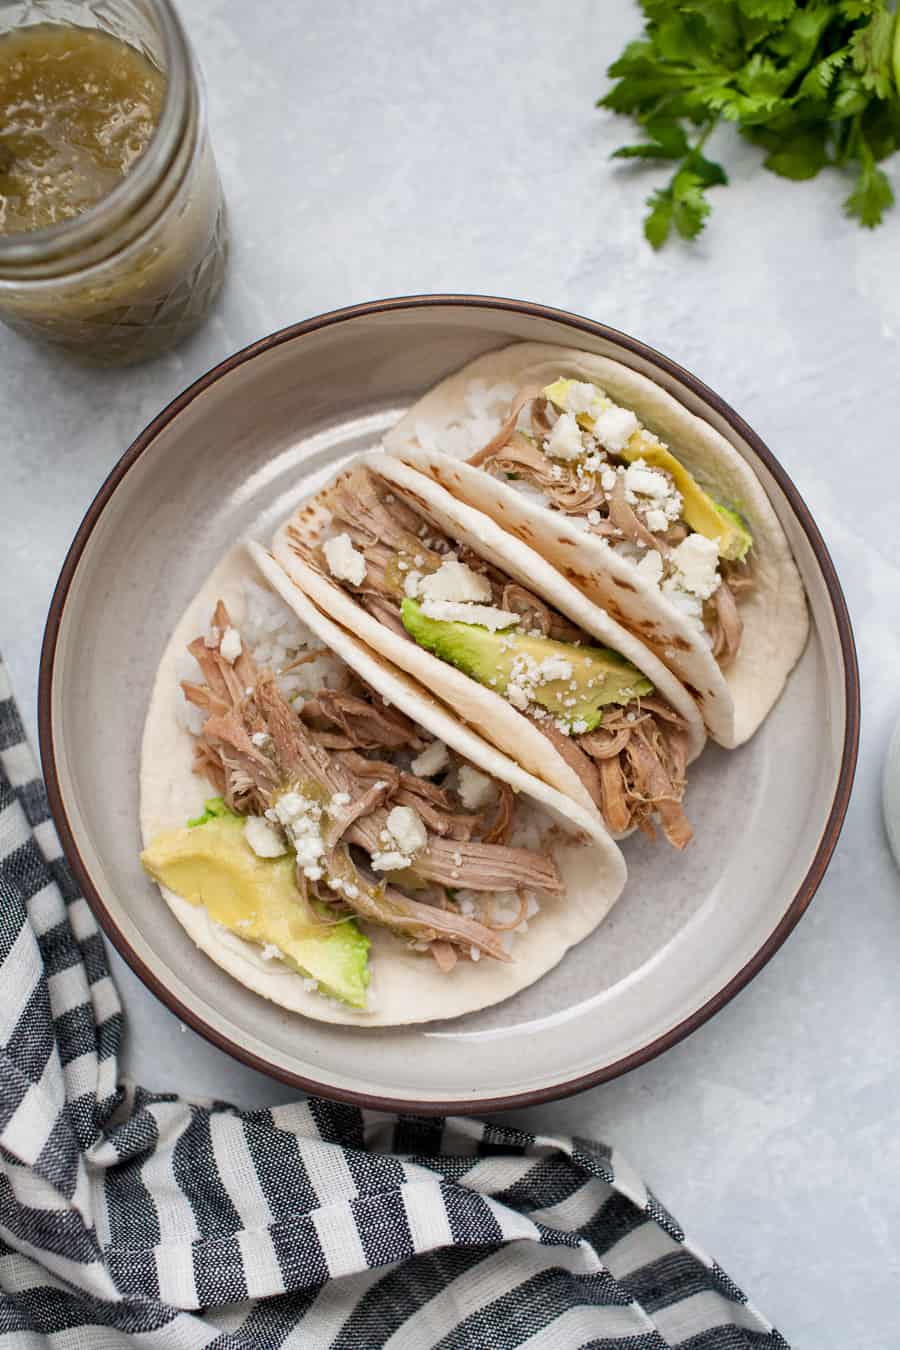 These Salsa Verde Pulled Pork tacos are the perfect dish for lunch, dinner, or just because they're so yummy! They're made with slow cooker Salsa Verde Pulled Pork, cotija cheese, avocado and a little extra salsa verde poured on for good measure. You don't need an occasion to indulge with these tacos!